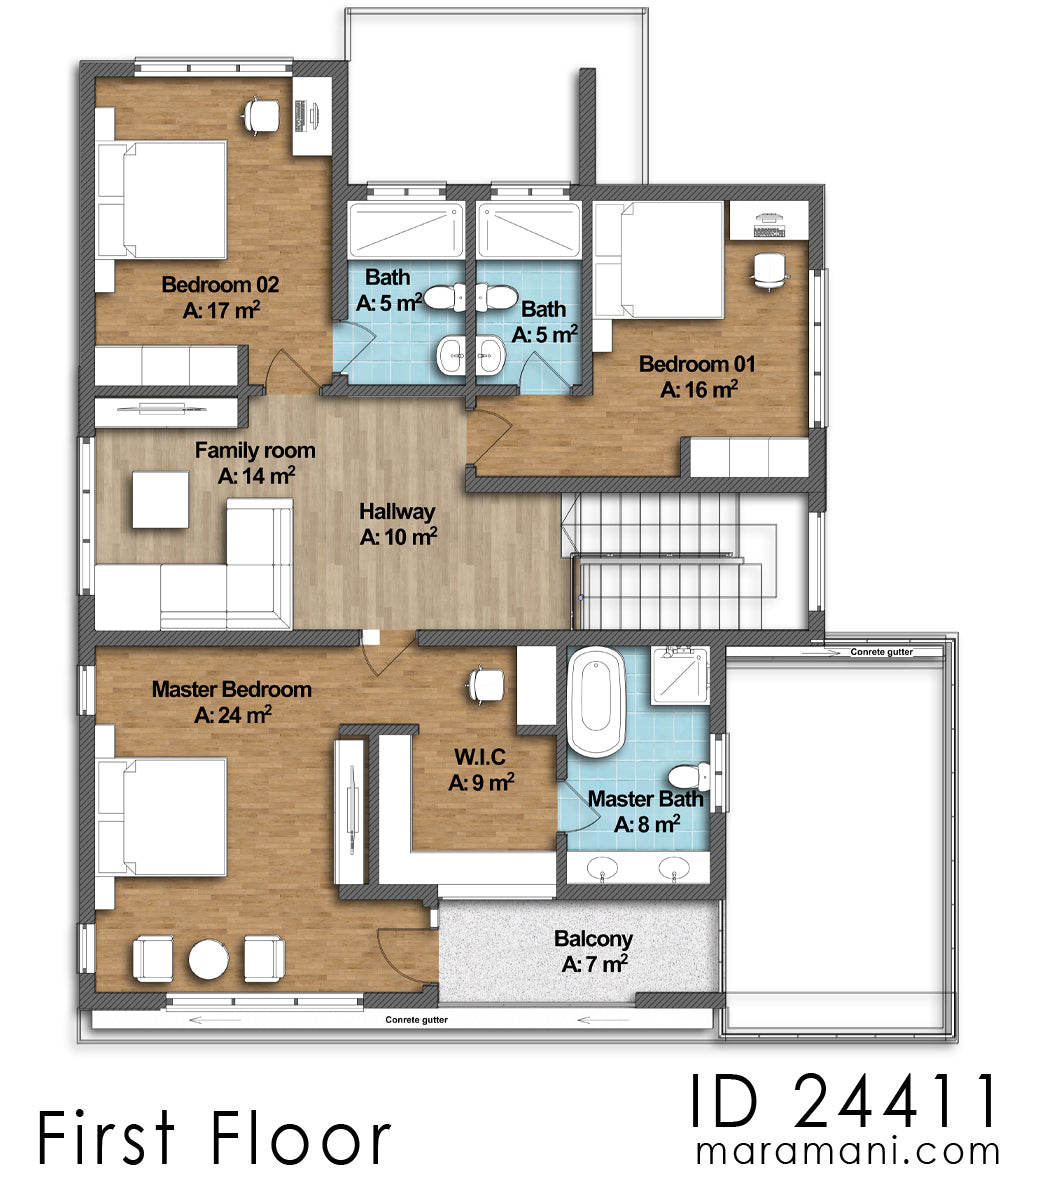 Two-story 4 bedroom house - ID 24411